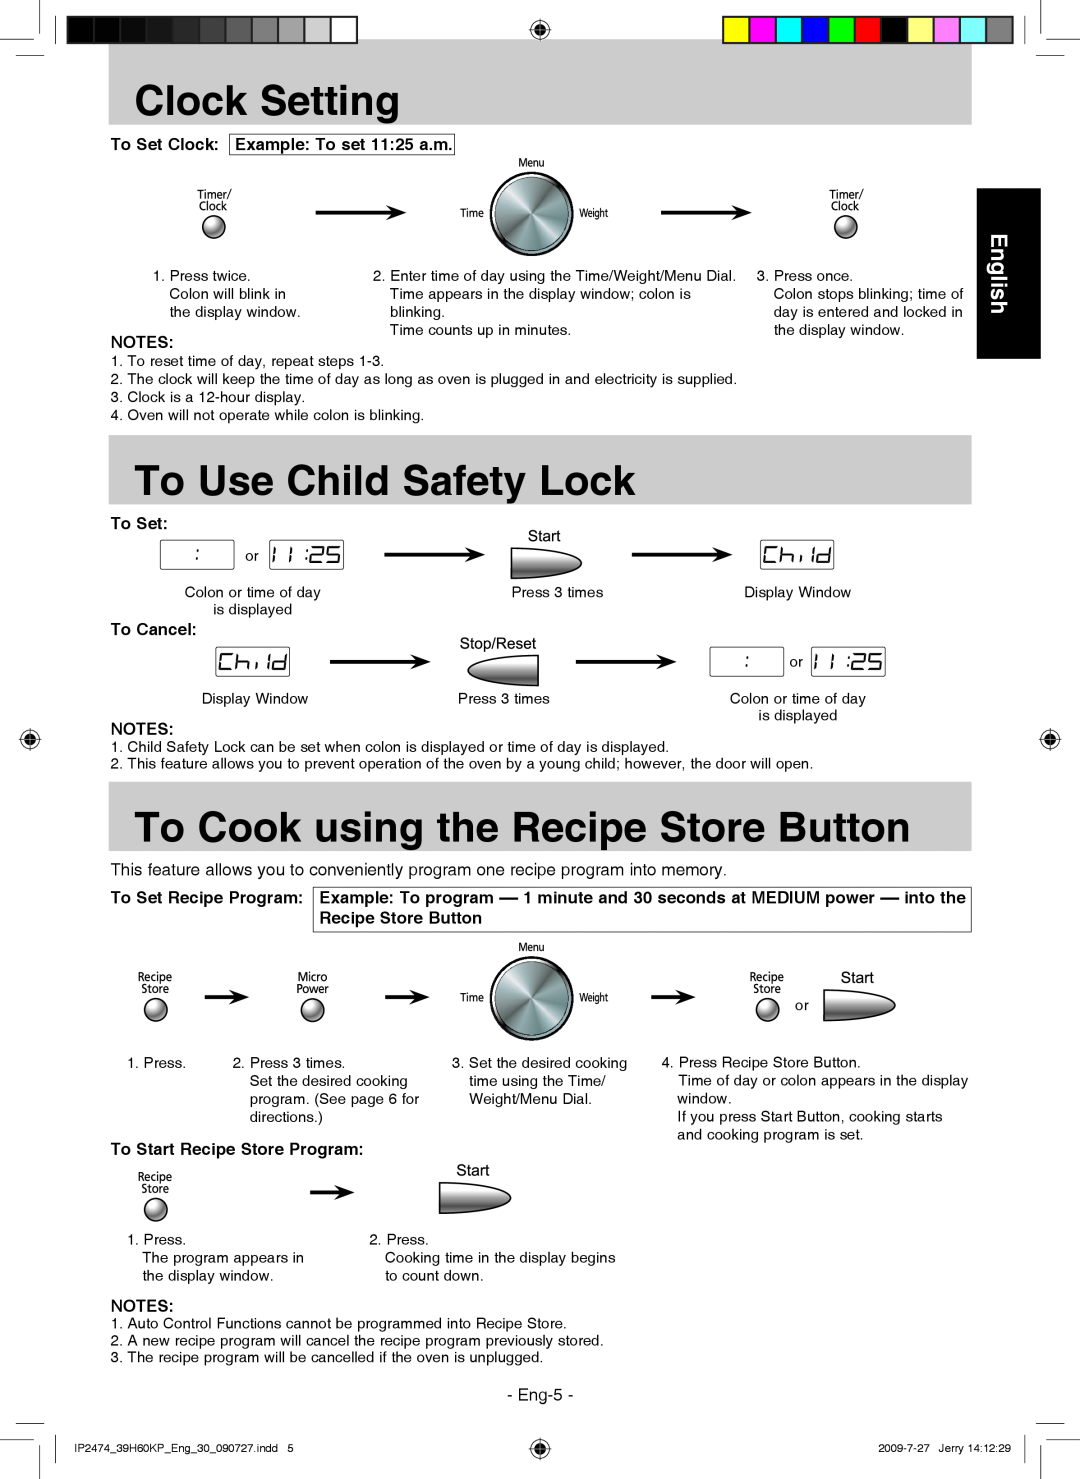 Panasonic NN-GD579S Clock Setting, To Use Child Safety Lock, To Cook using the Recipe Store Button, English, To Set, Eng-5 